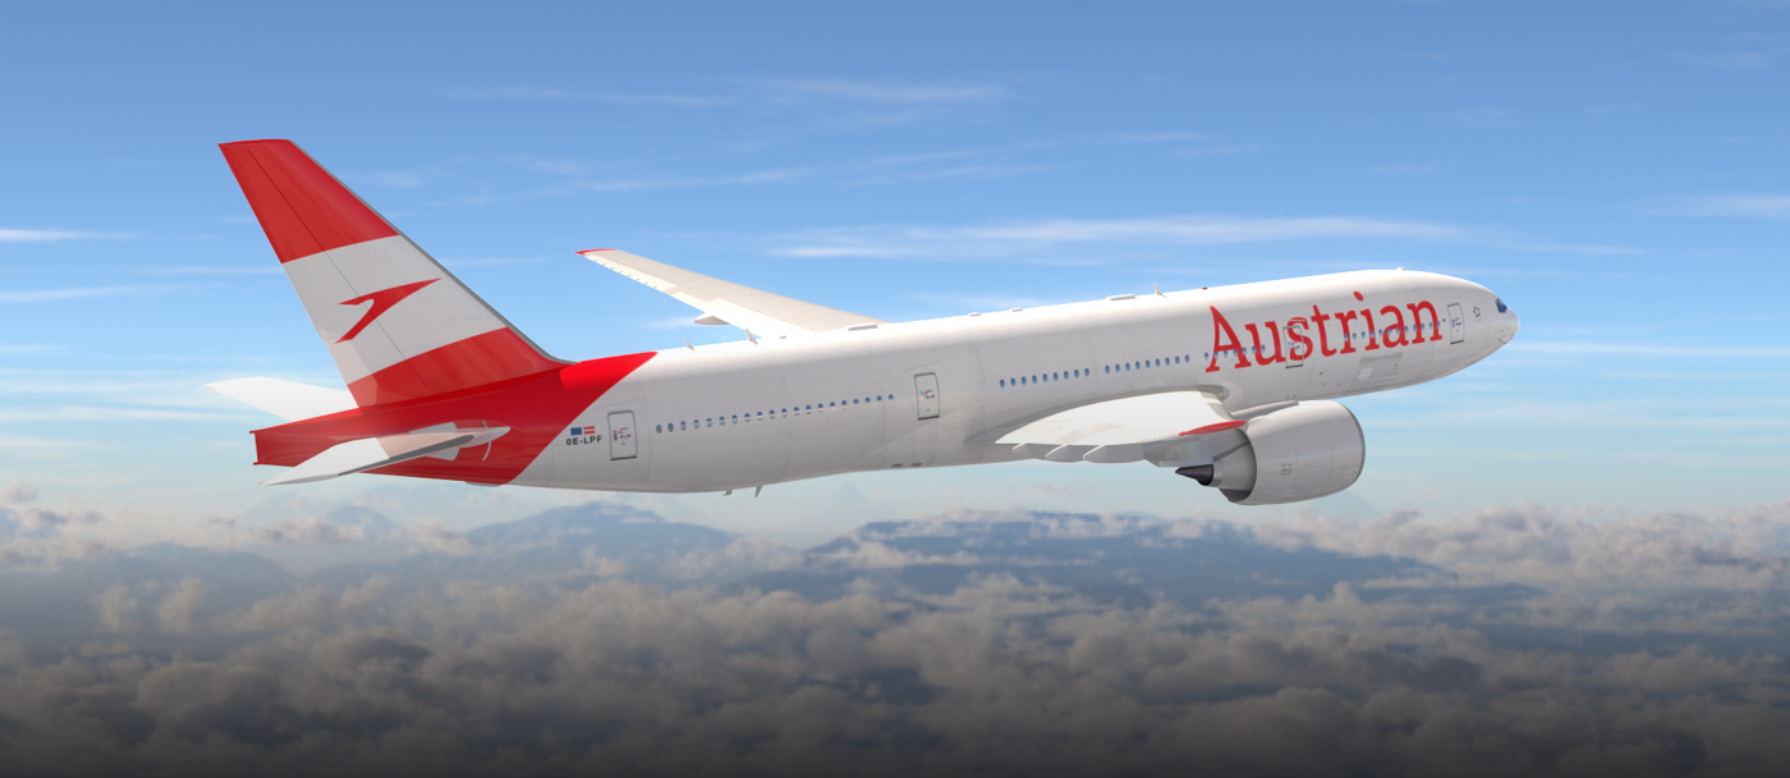 austrian aircraft render with blue sky and puffy clouds over mountain tops